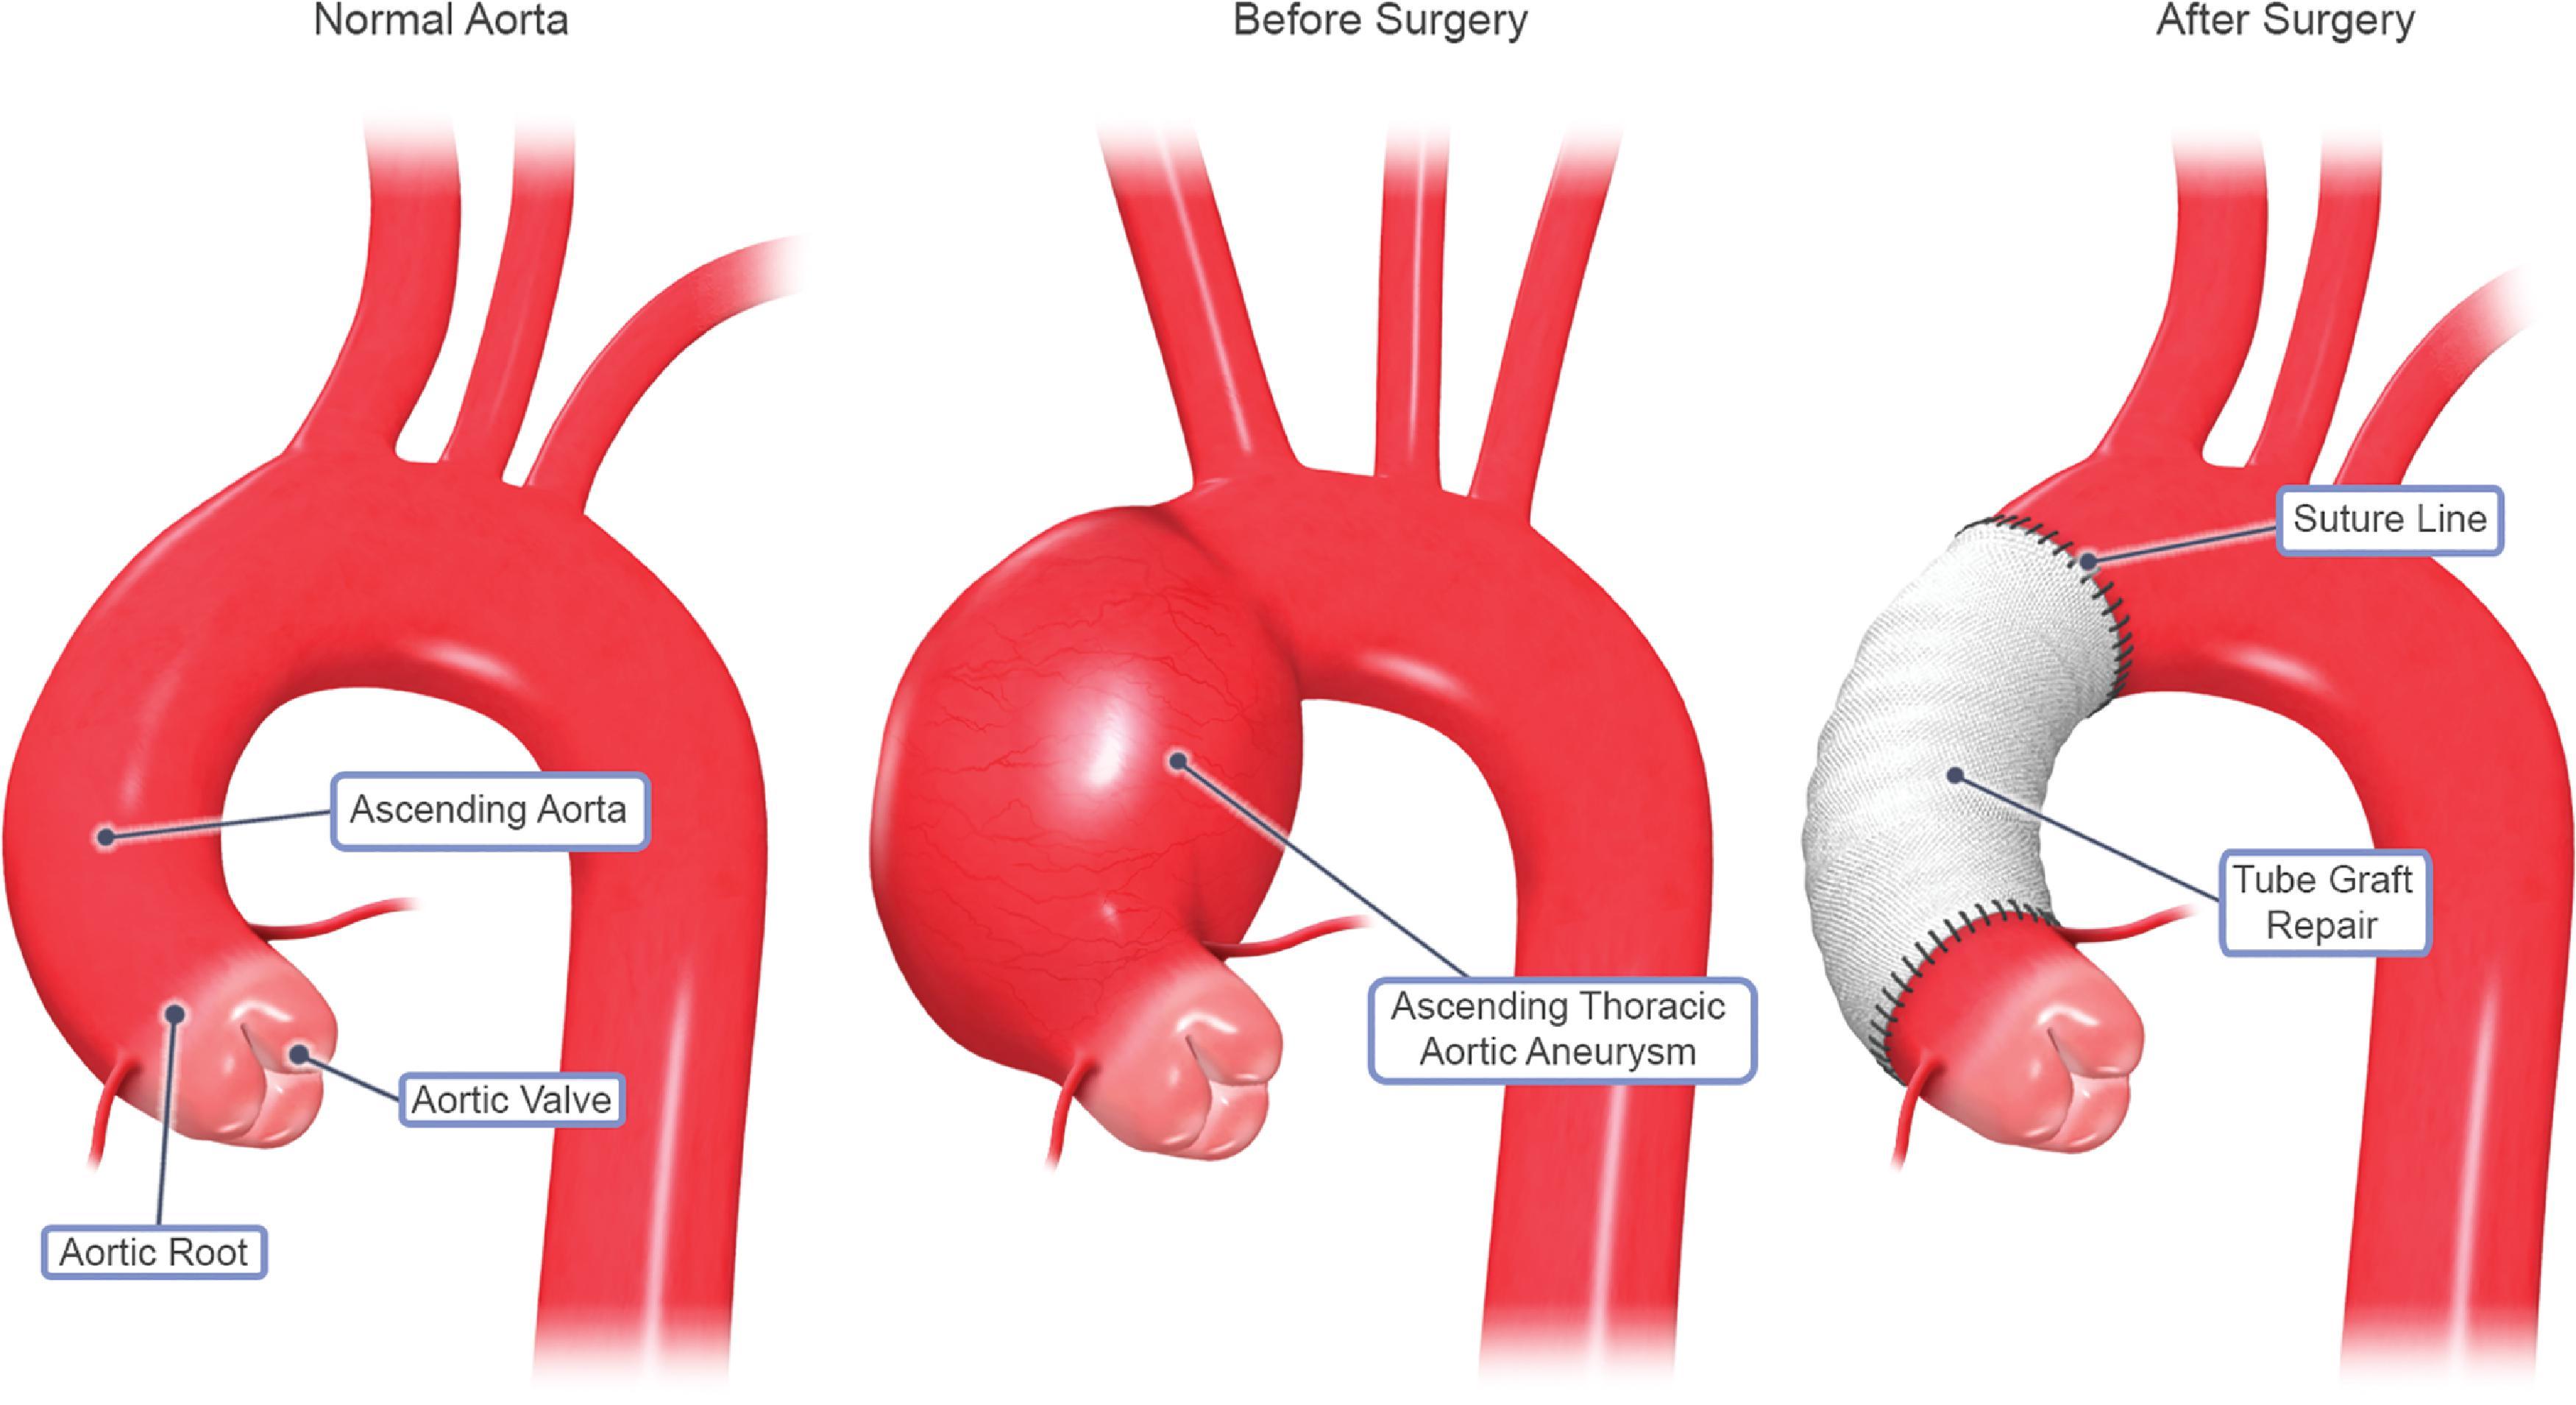 • Fig. 39.4, An example of an ascending thoracic aortic aneurysm repair utilizing a tube graft.